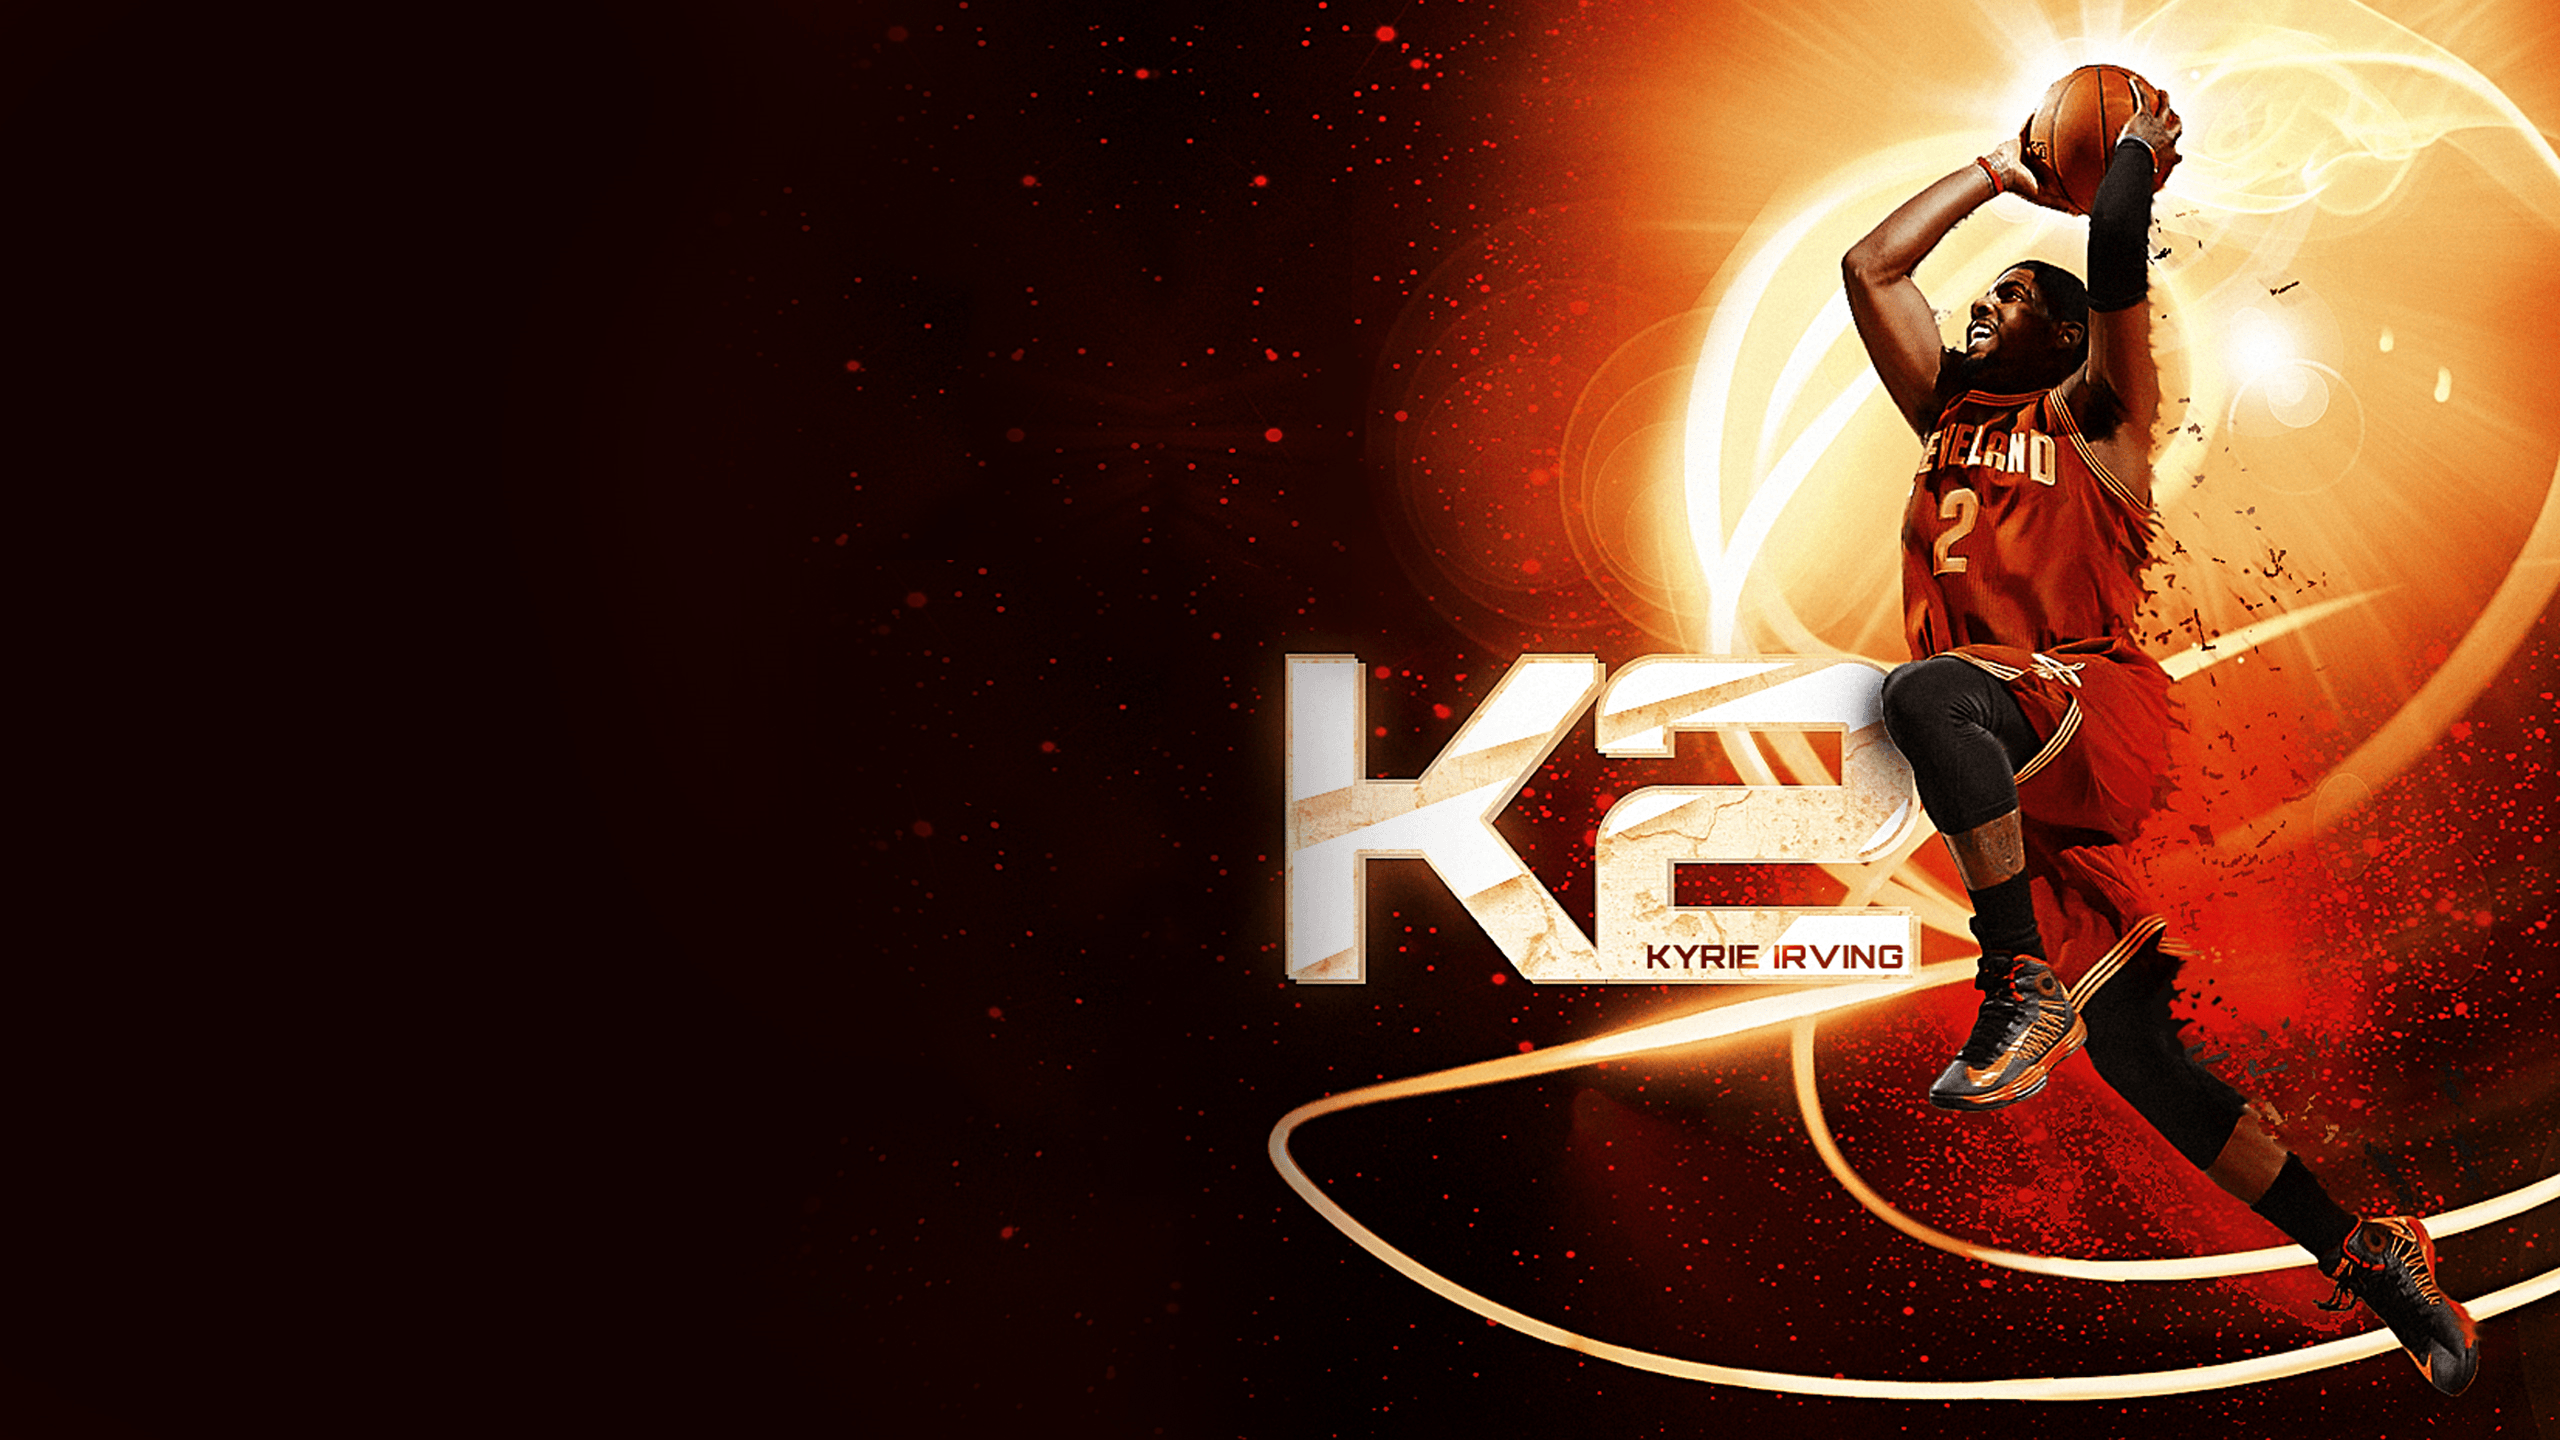 kyrie irving live wallpaper,basketball player,graphic design,fictional character,action adventure game,graphics